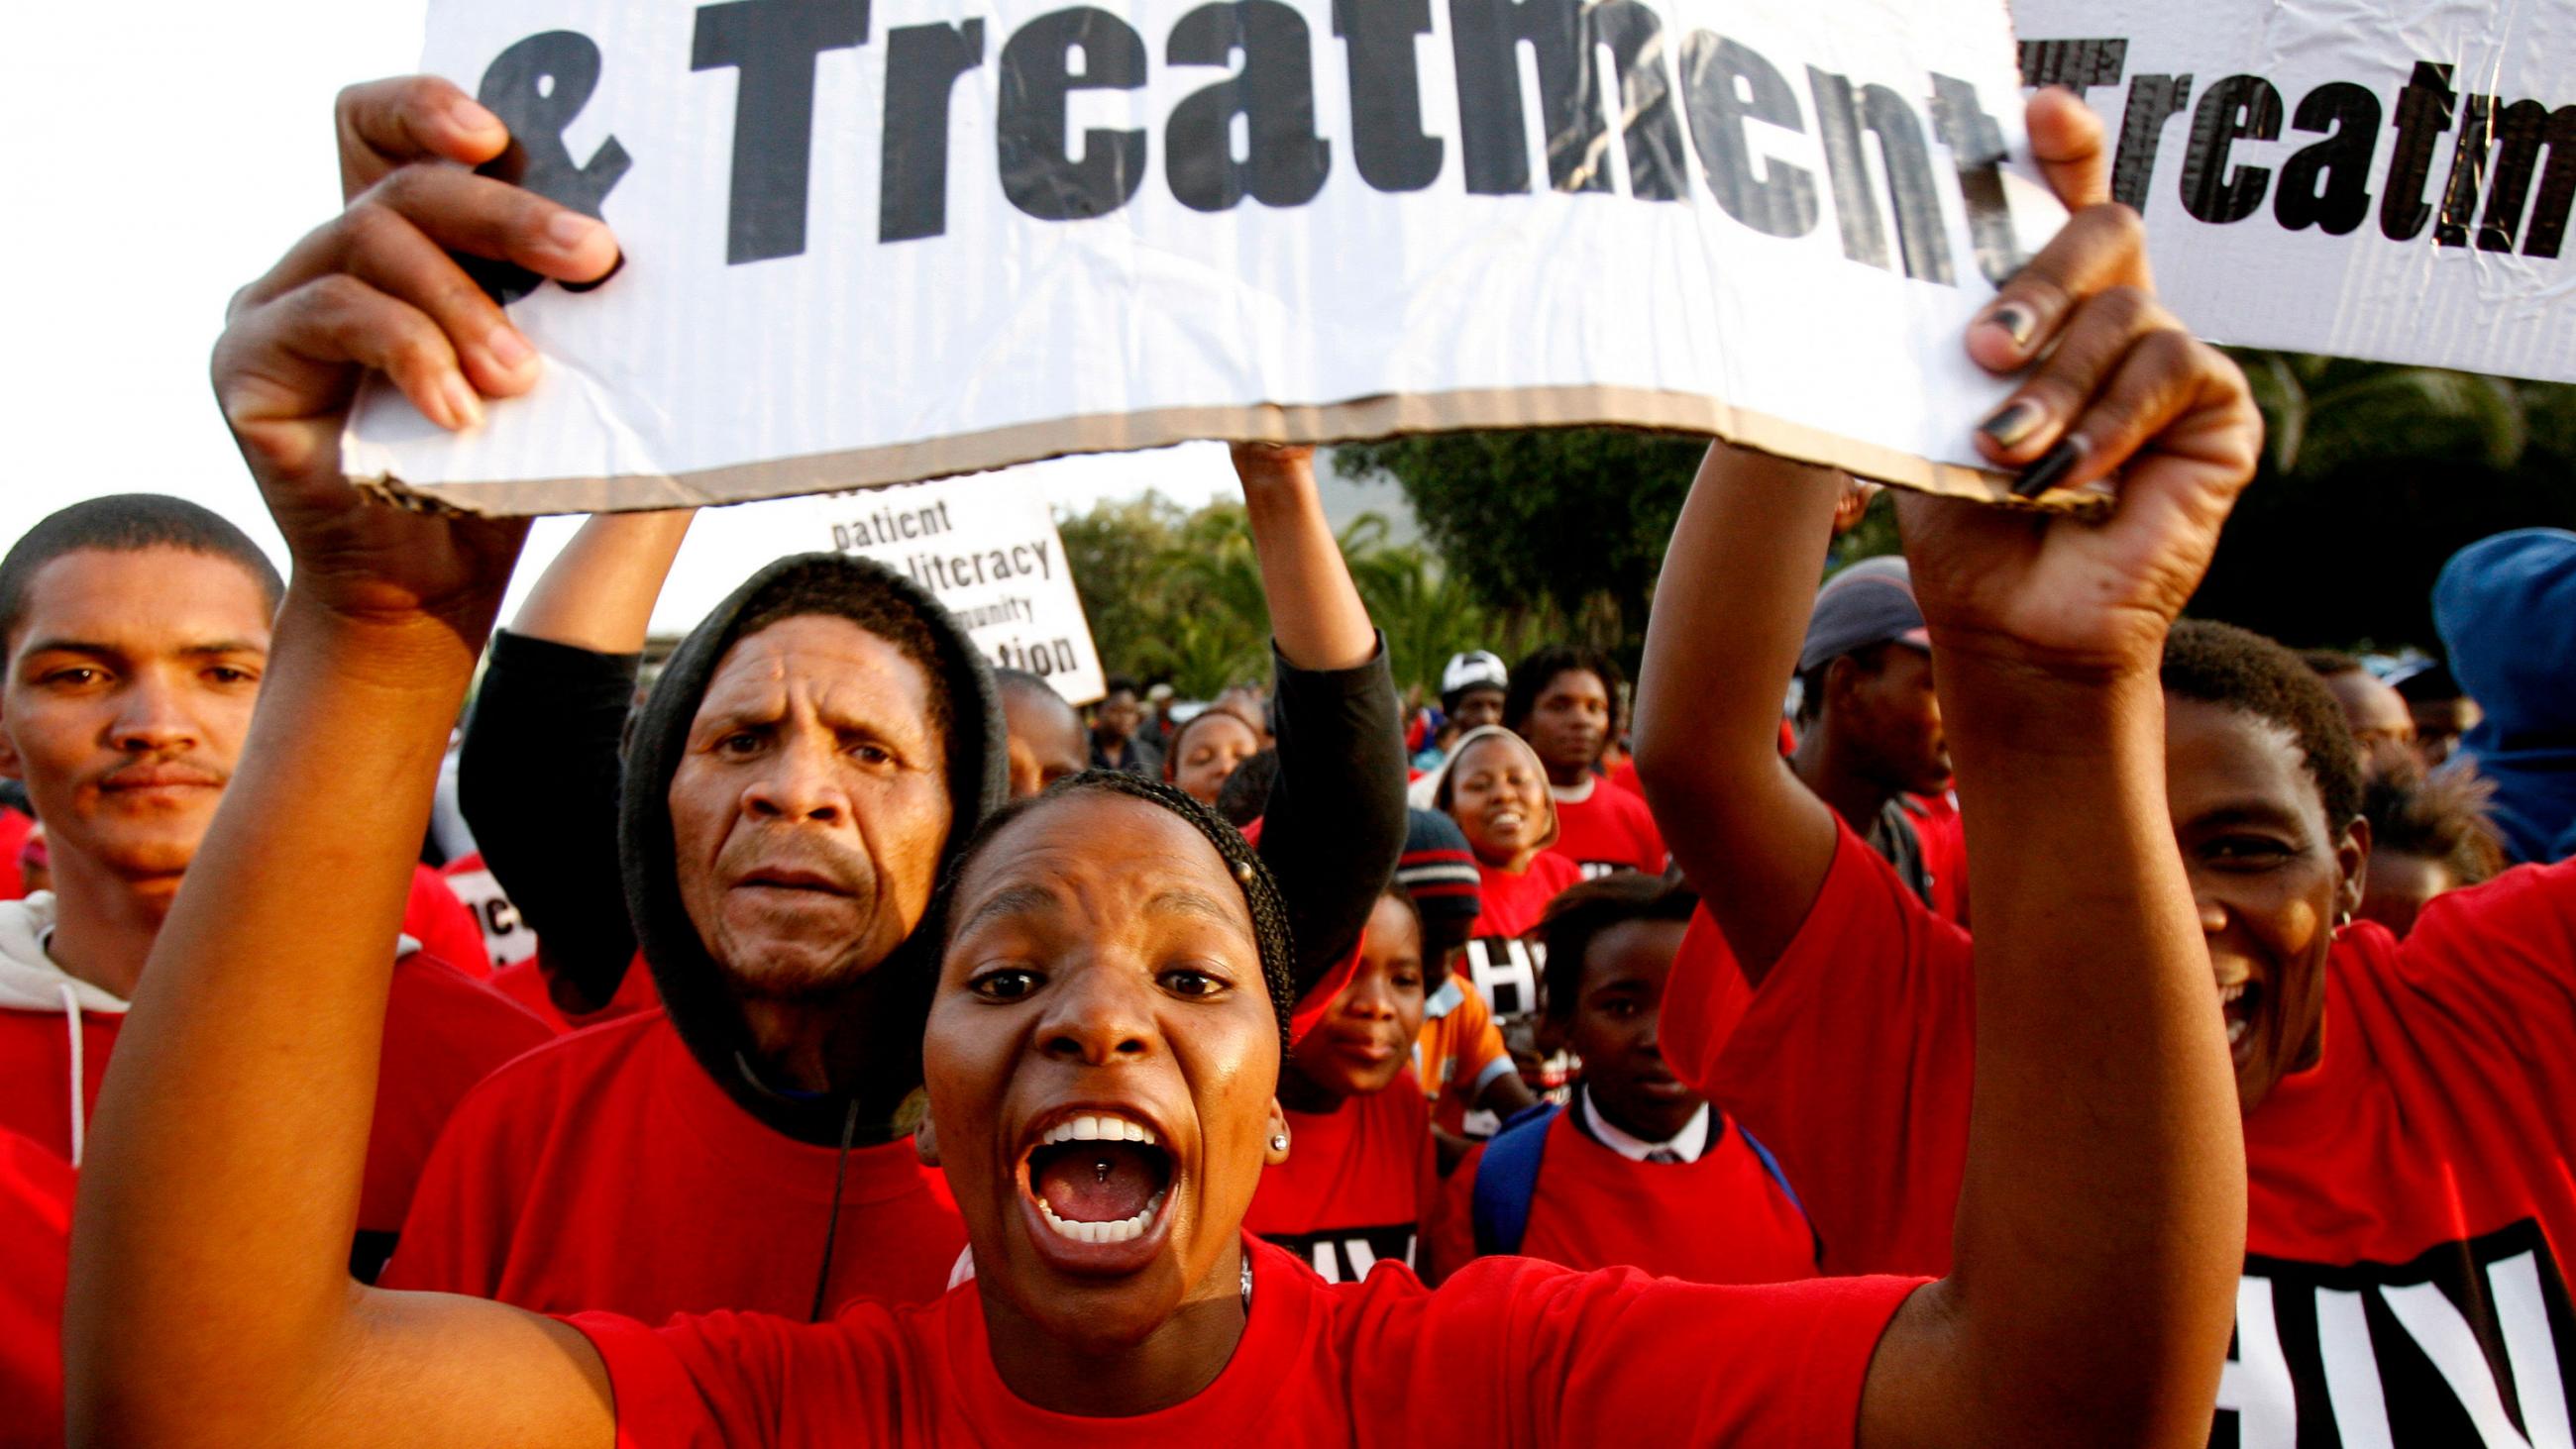 Demonstrators march through the streets of Cape Town to highlight the need for new strategies and medicines to curb the spread of tuberculosis on November 8, 2007. Picture shows a crowd of people wearing red shirts with a woman at center shouting into the camera